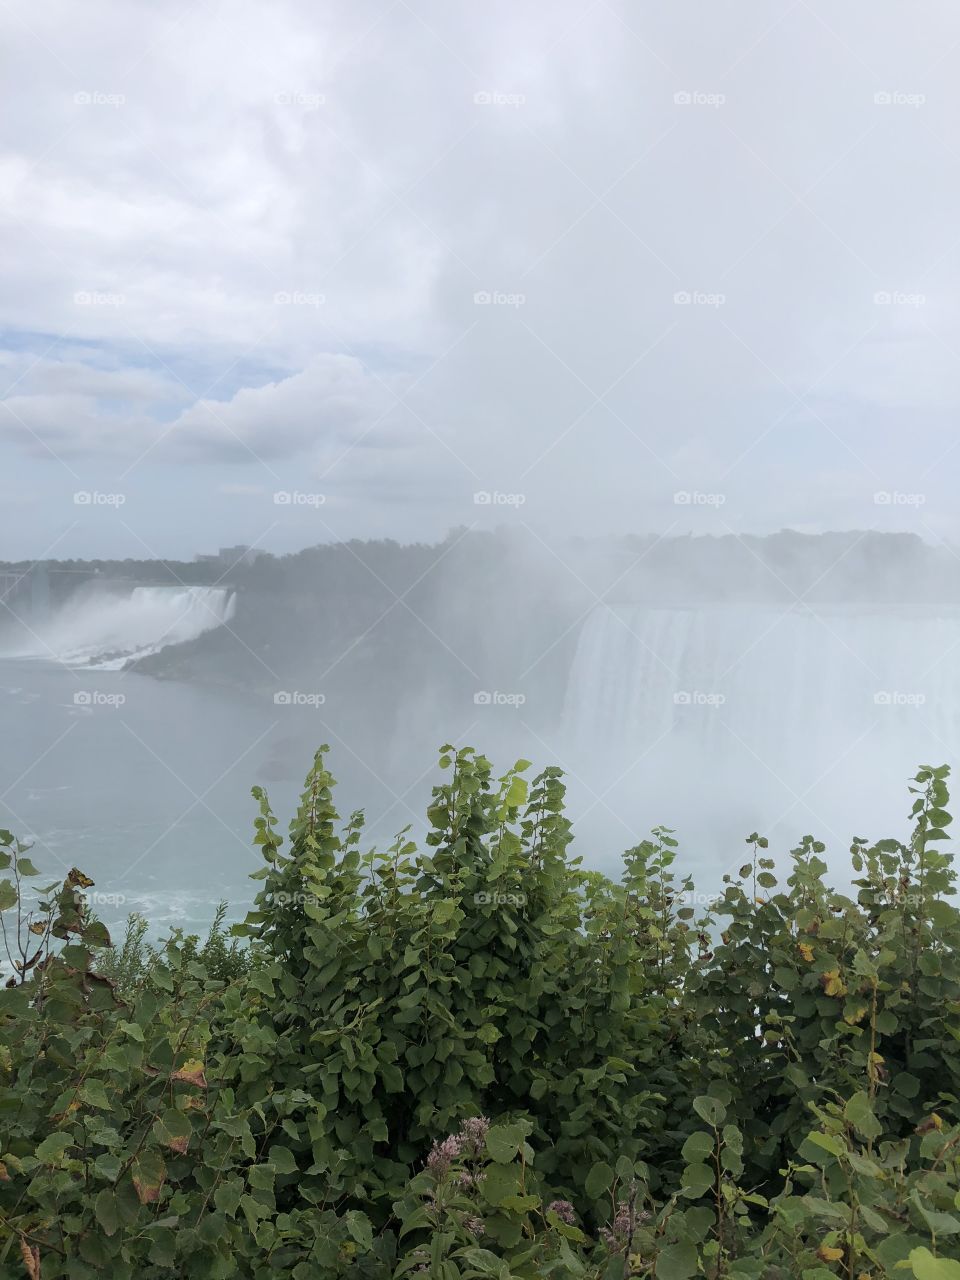 A view of the American side of the Niagra Falls!